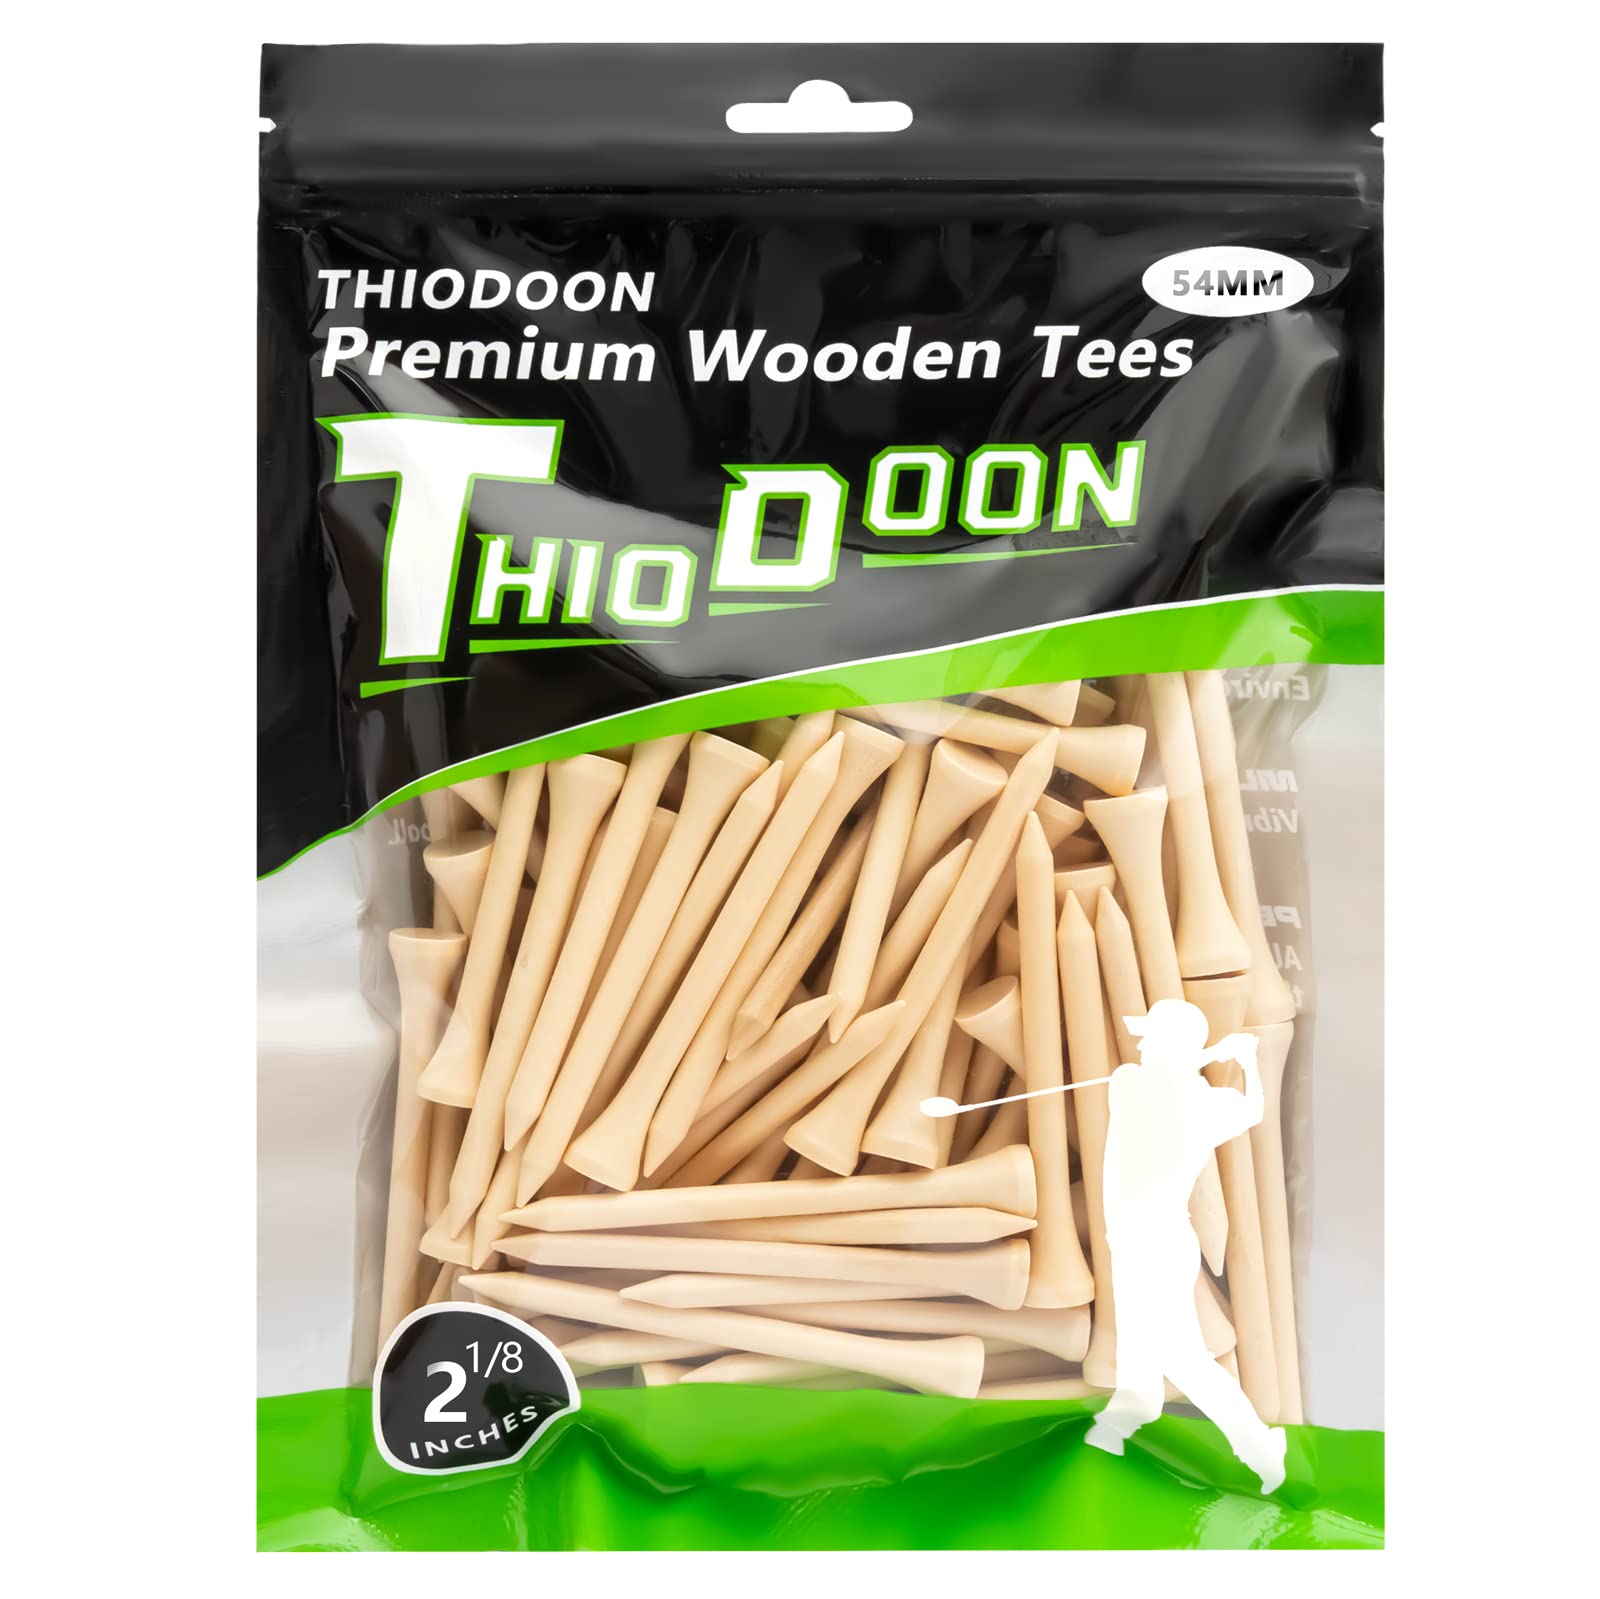 Thiodoon Golf Tees 2 34 Inch Less Friction Wood Tees Training For Golfer Professional Natural Wood Golf Tees Bulk 100 Count Golf